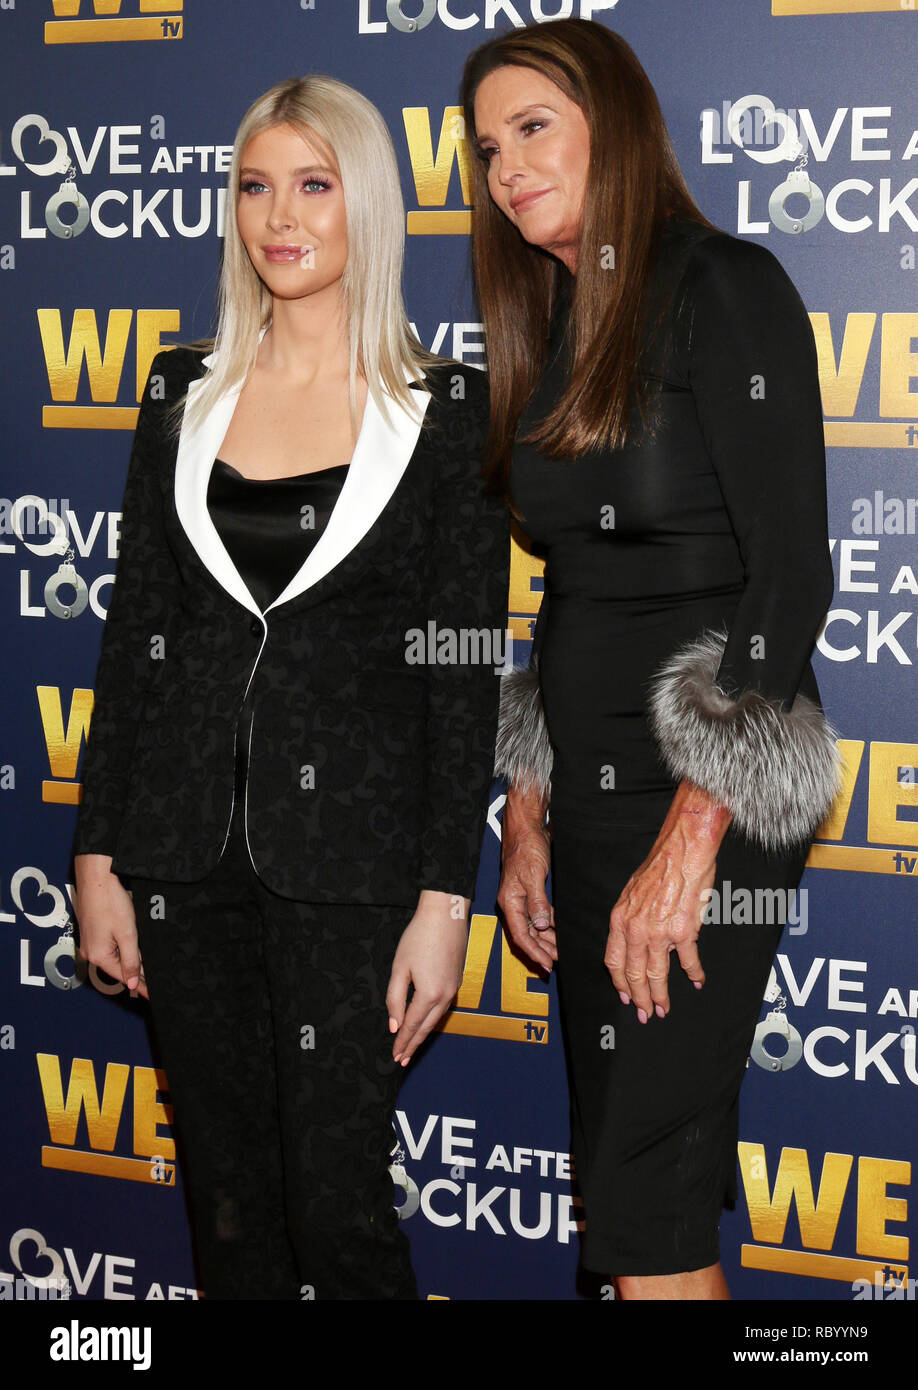 WE TV celebrates the return of 'Love After Lockup' with panel, 'Real Love: Relationship Reality TV's Past, Present & Future,' at The Paley Center for Media  Featuring: Sophia Hutchins, Caitlyn Jenner Where: Beverly Hills, California, United States When: 12 Dec 2018 Credit: Nicky Nelson/WENN.com Stock Photo